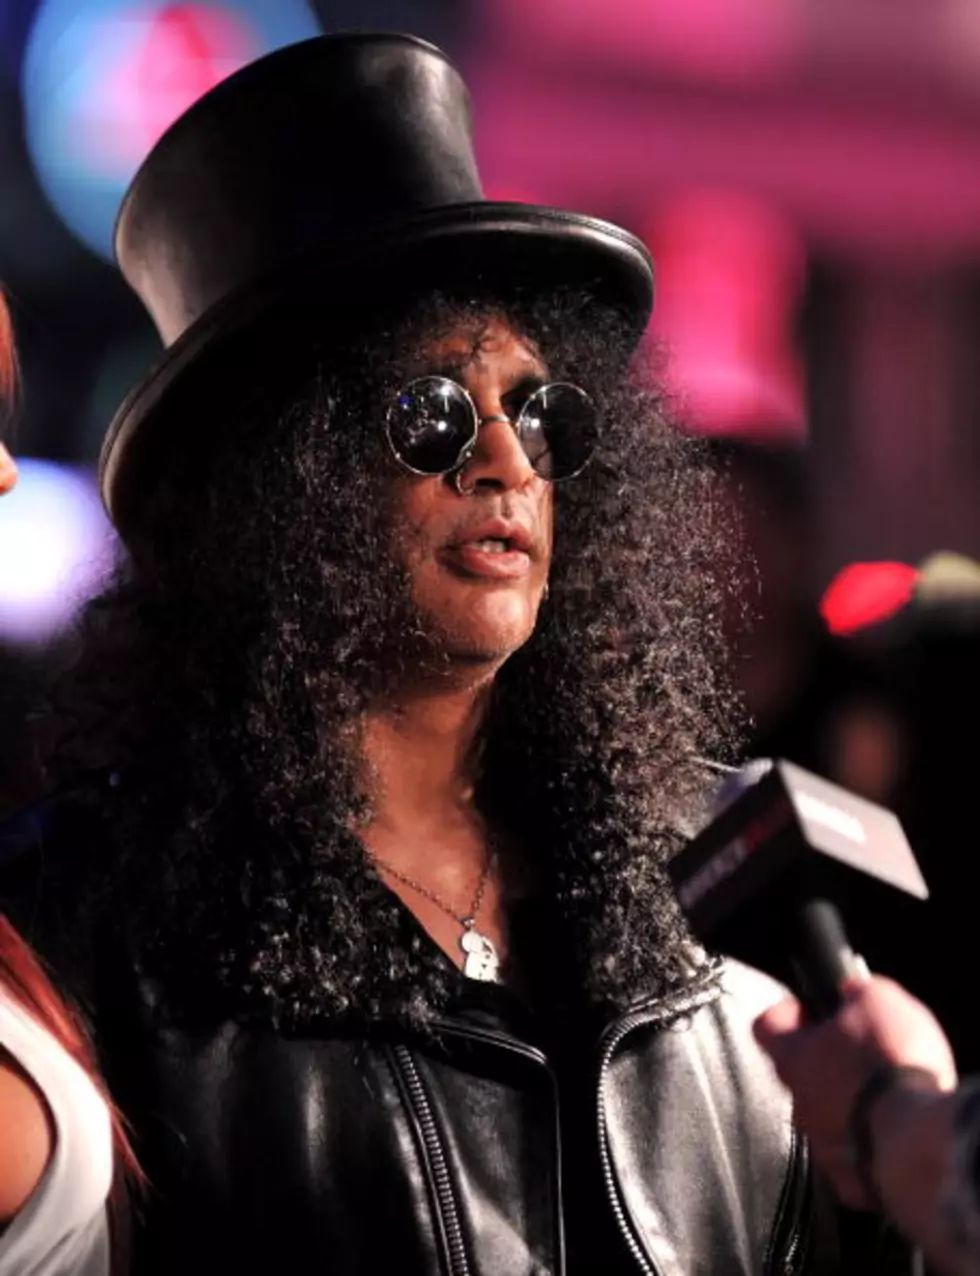 Who Does Slash Think of as “Rock ‘n’ Roll”?